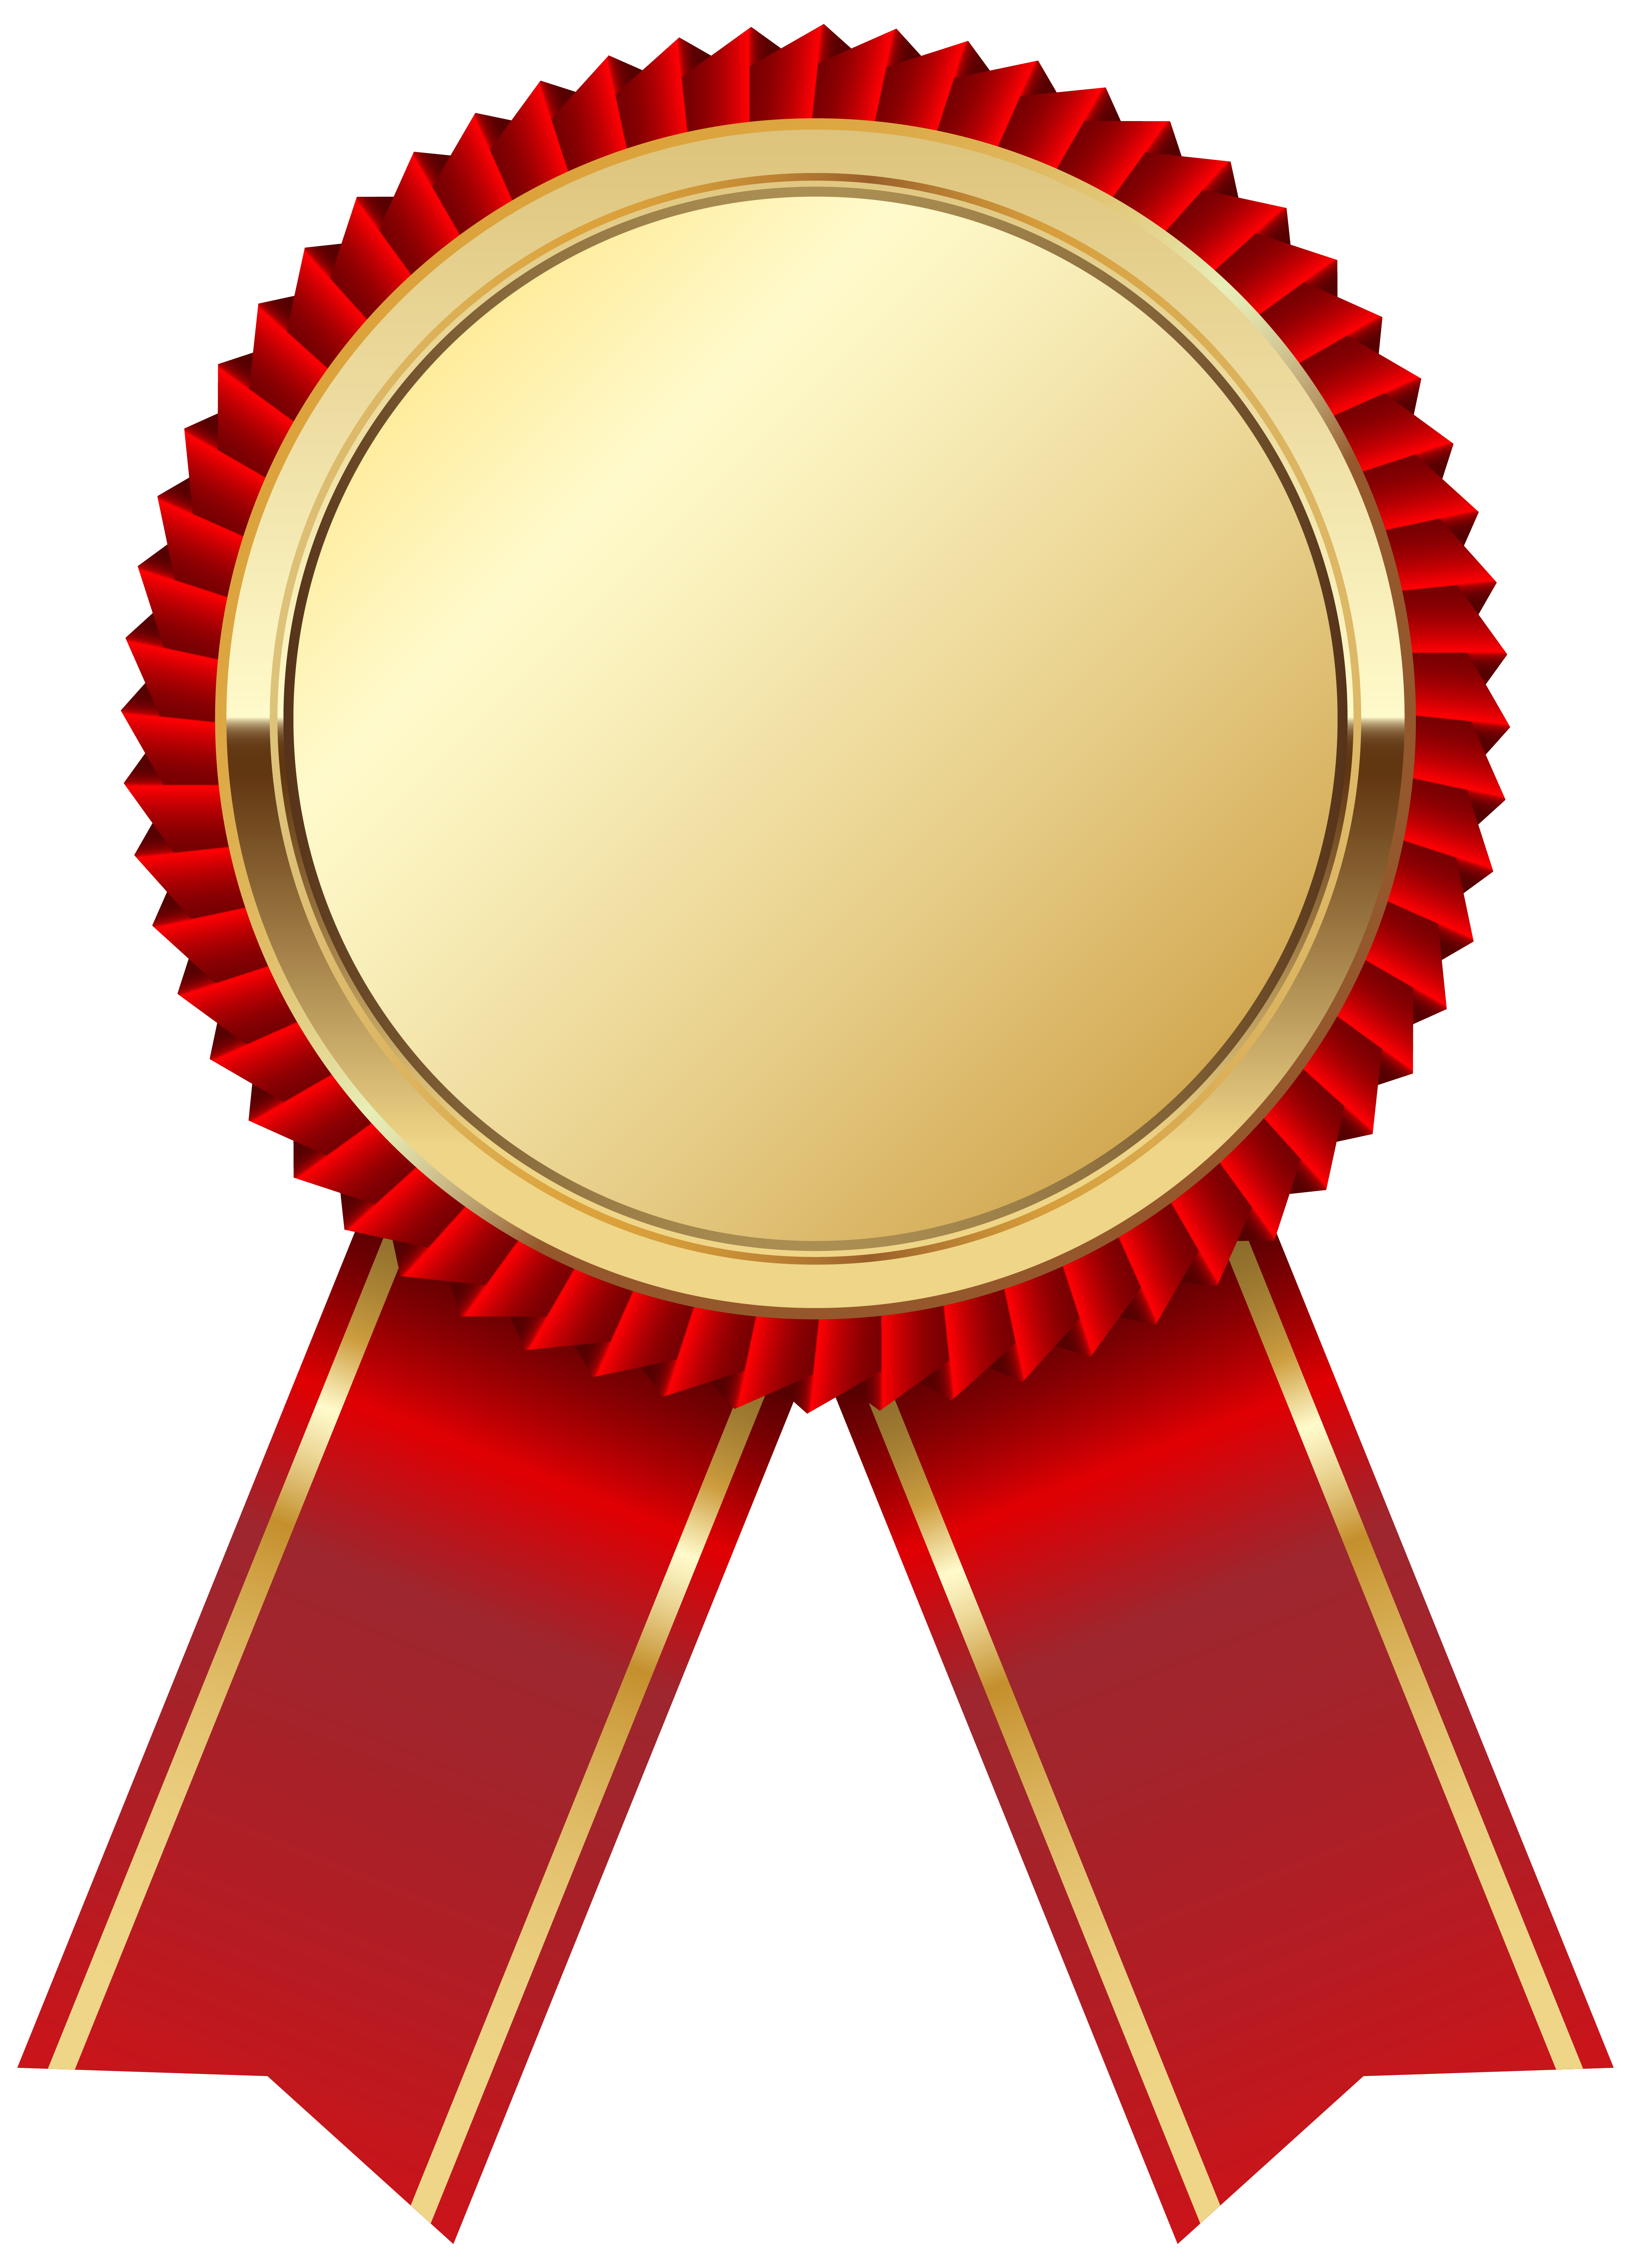 medals clipart free - photo #42